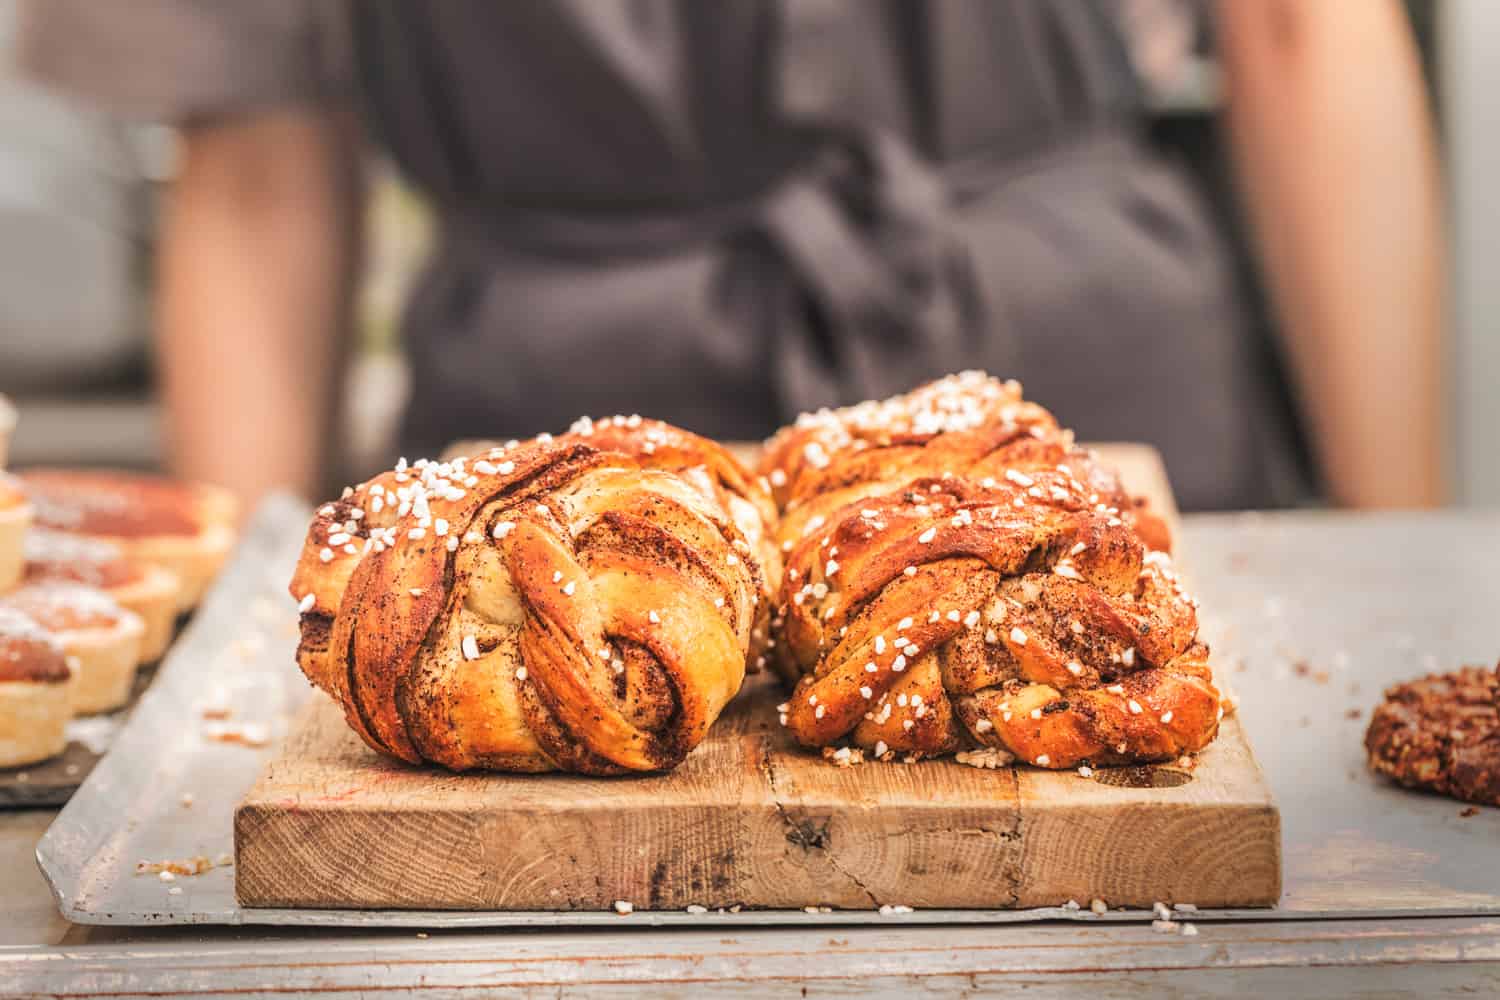 Twisted traditional Swedish cinnamon buns at a café. The sweet buns are on a wooden chopping board